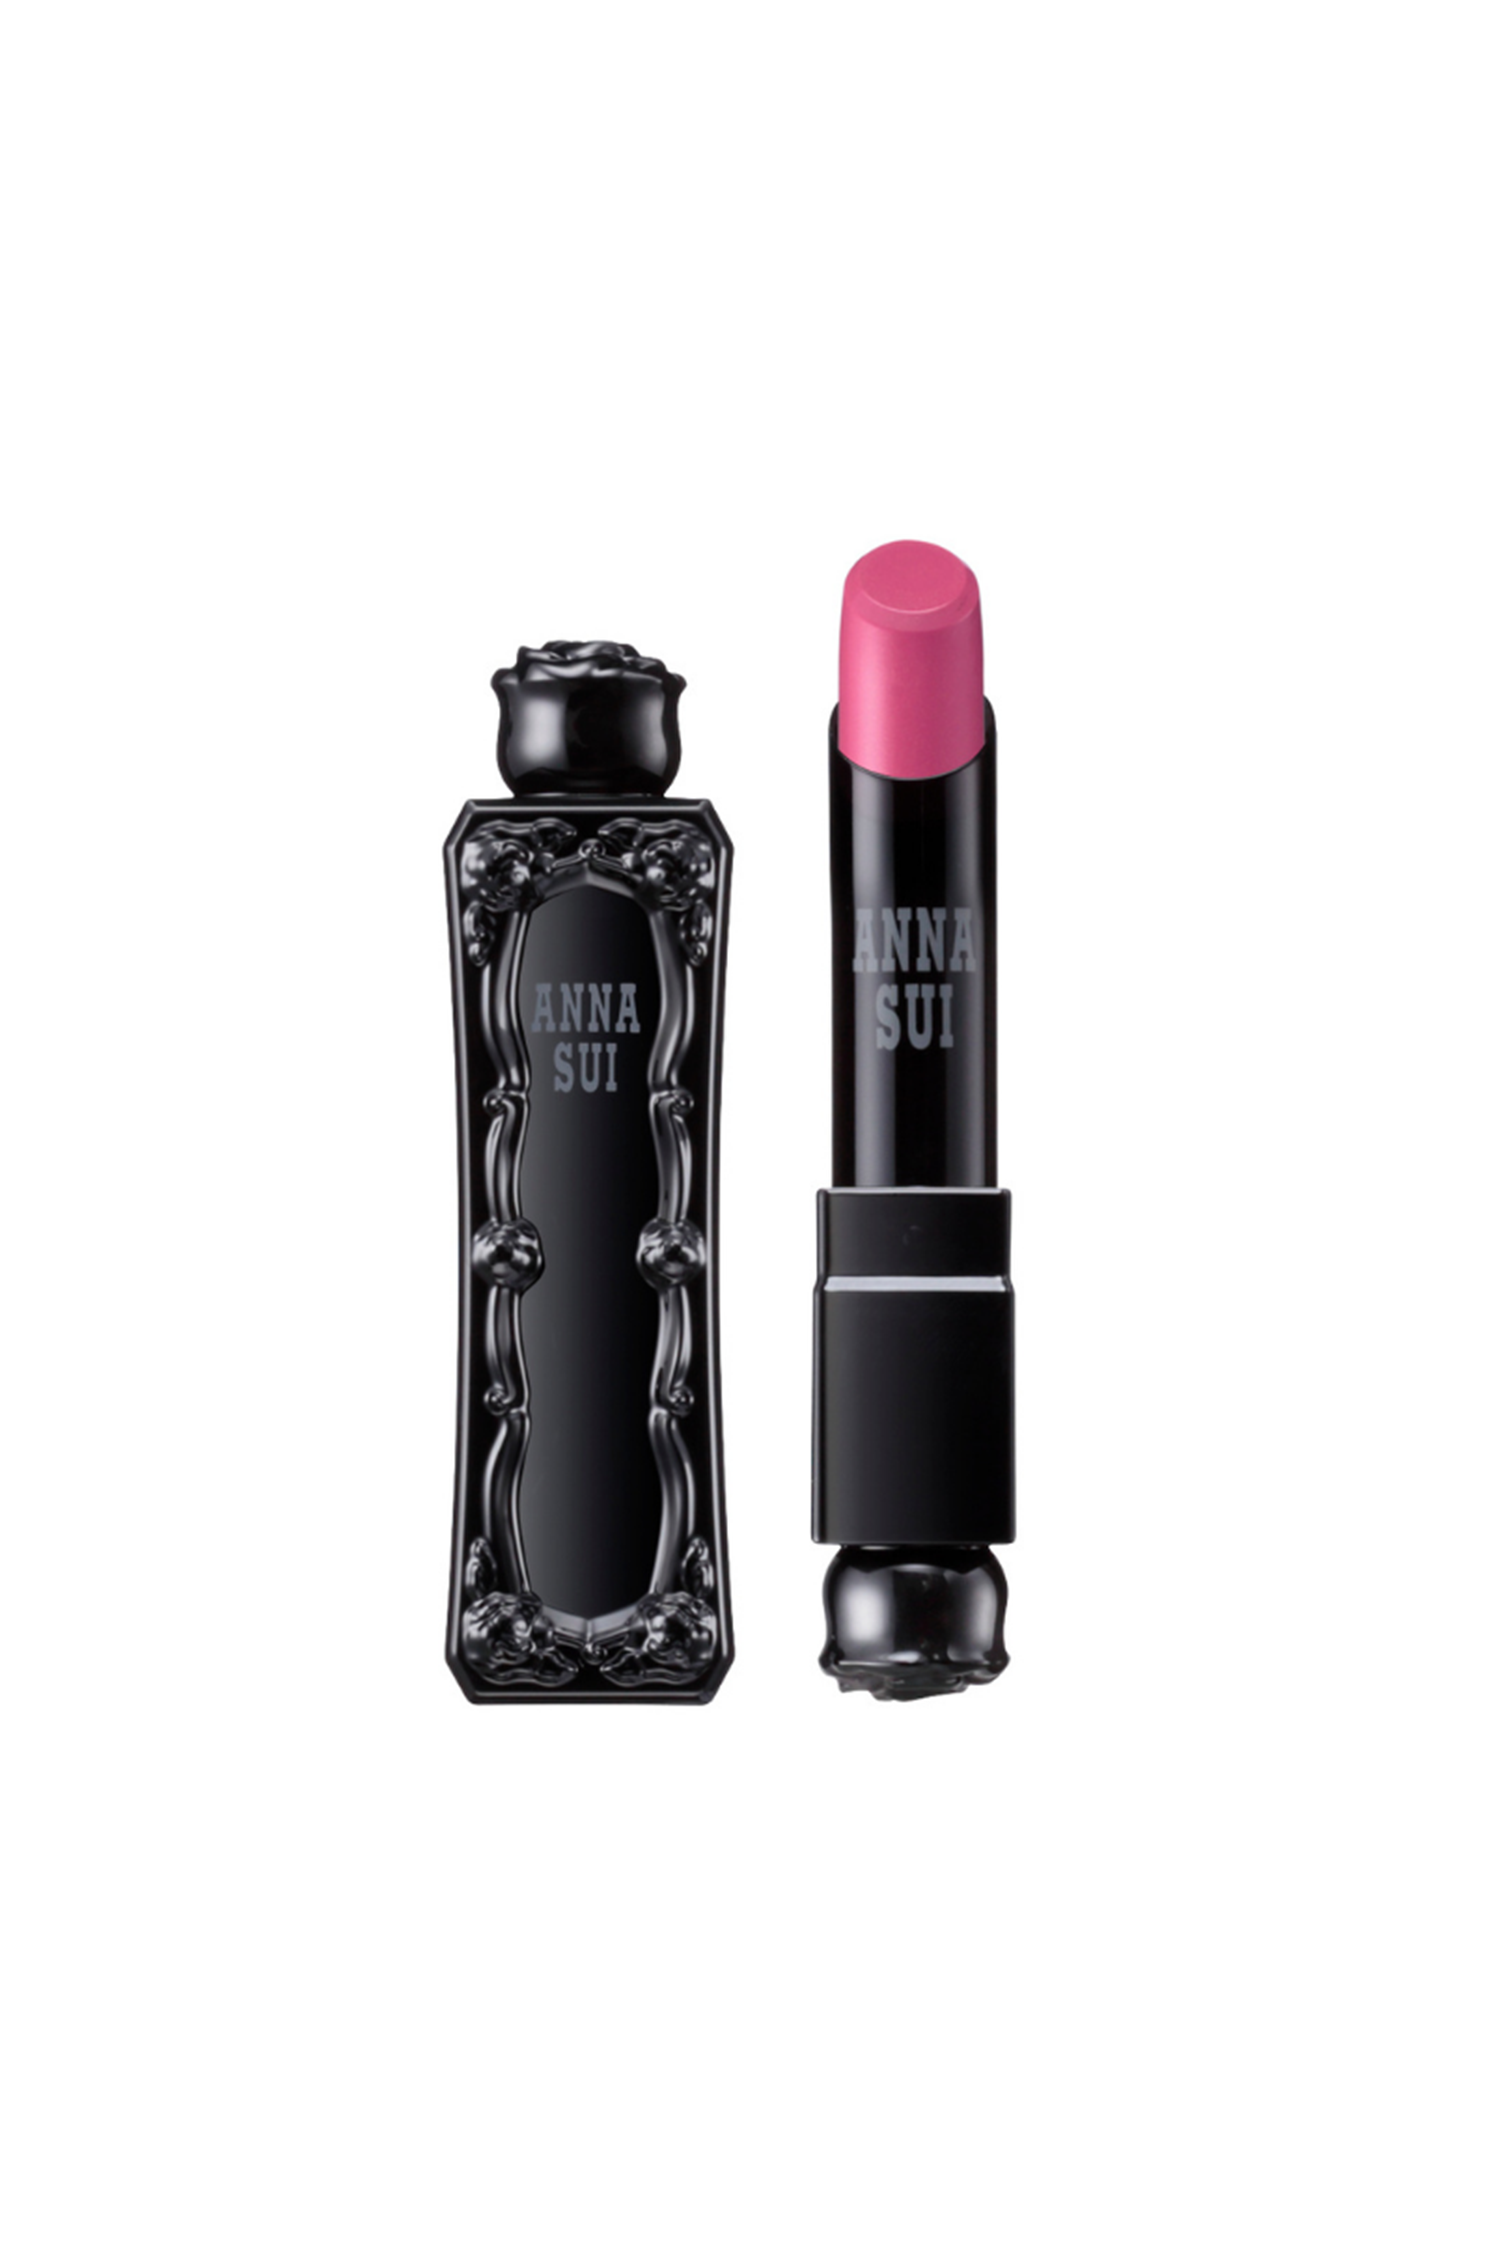 Pretty Pink lipstick, in an Anna Sui, black container with raised rose pattern, rose on top 